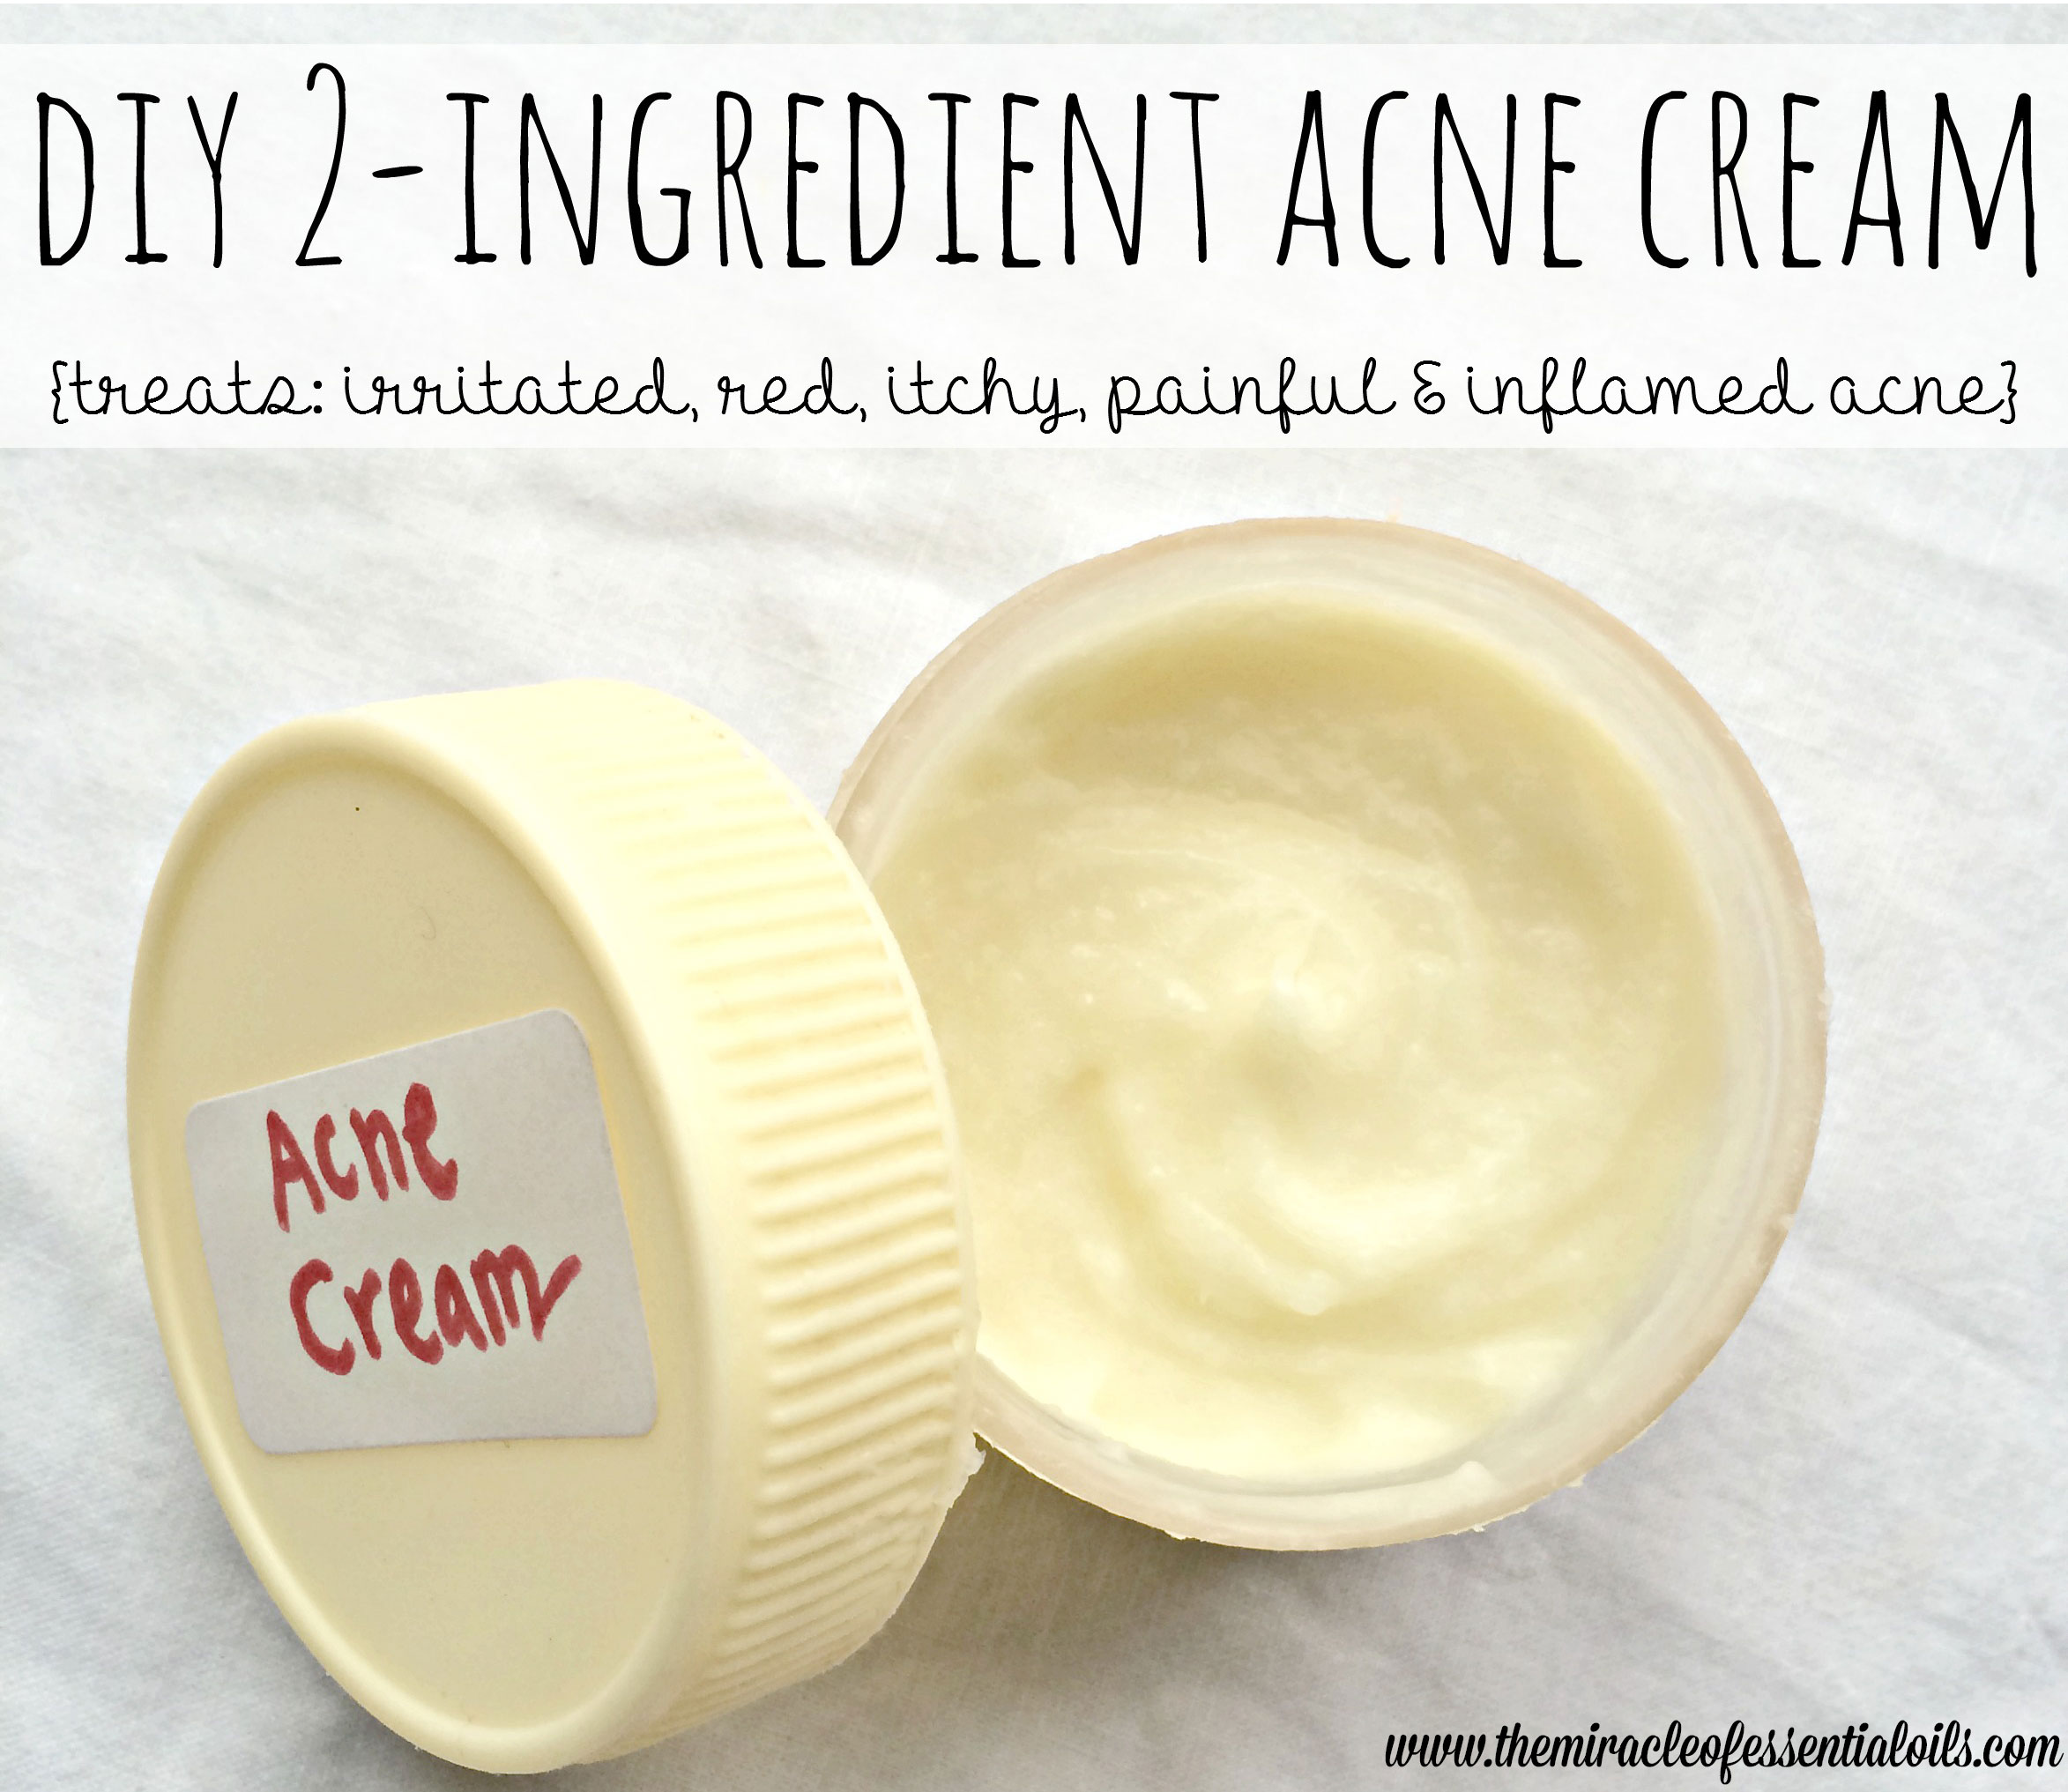 Homemade Cream for Acne with Tea Tree Oil | Only 2 Ingredients!